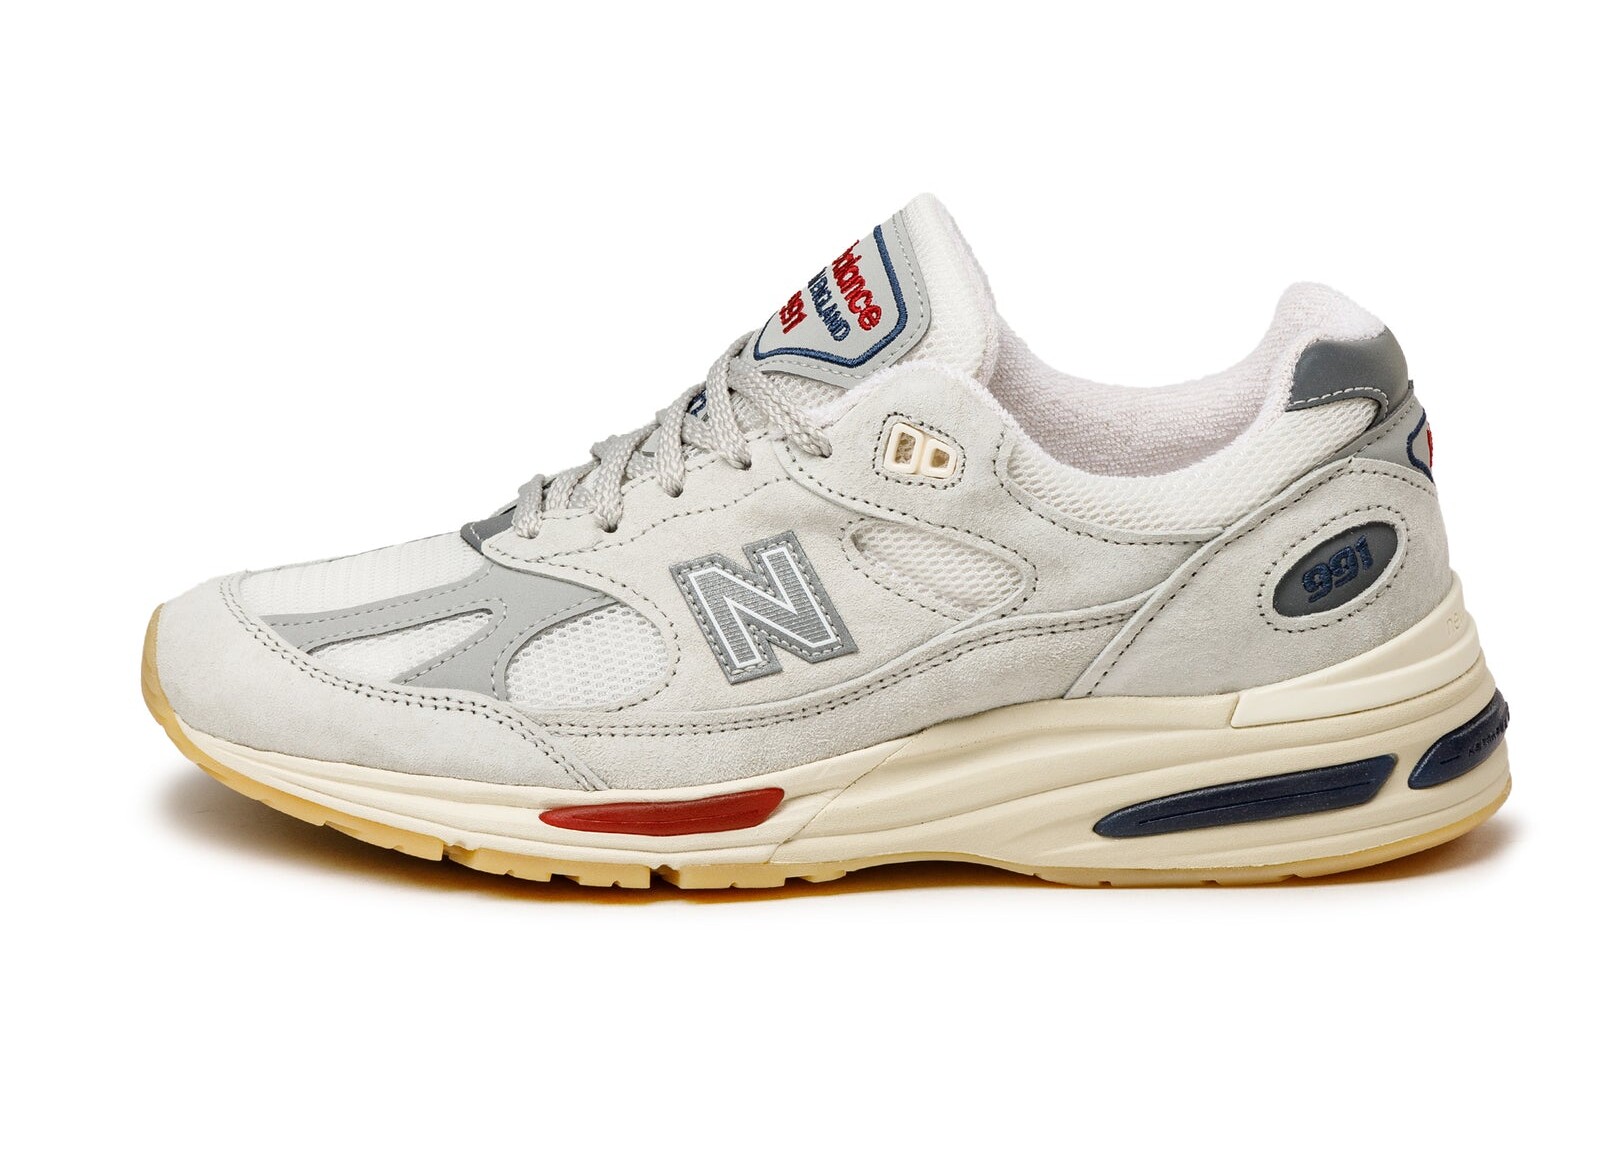 New Balance U991VS2
Made in England
Off White